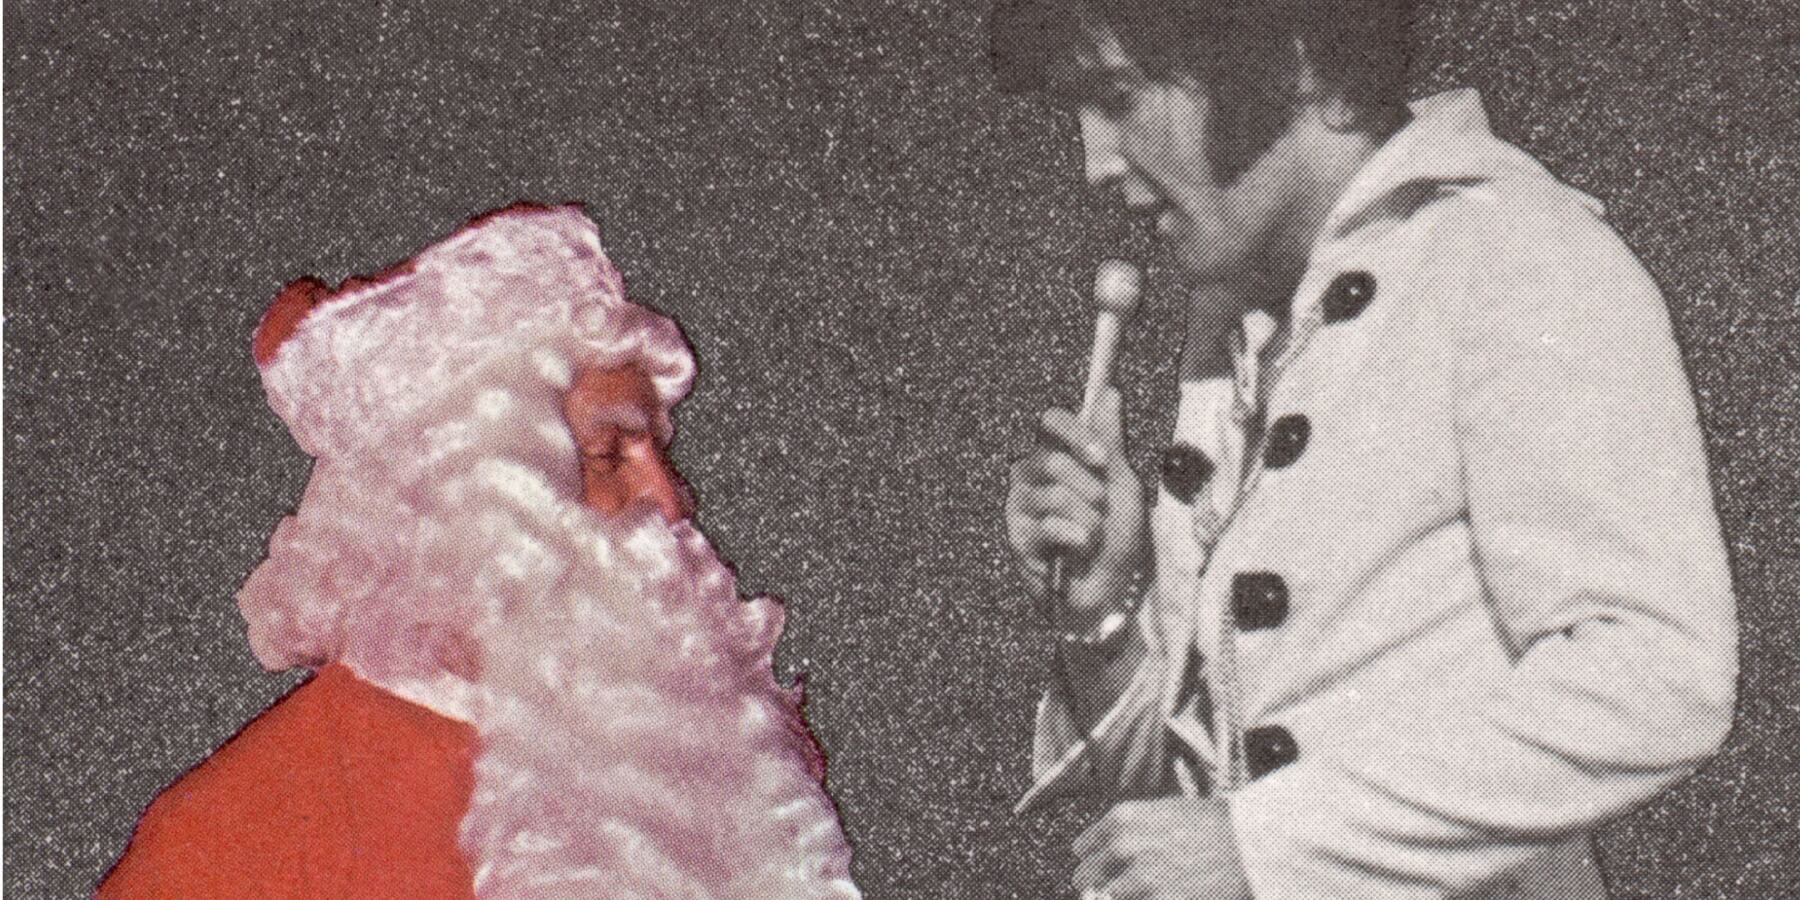 Colonel Tom Parker dressed as Santa Claus with Elvis Presley.